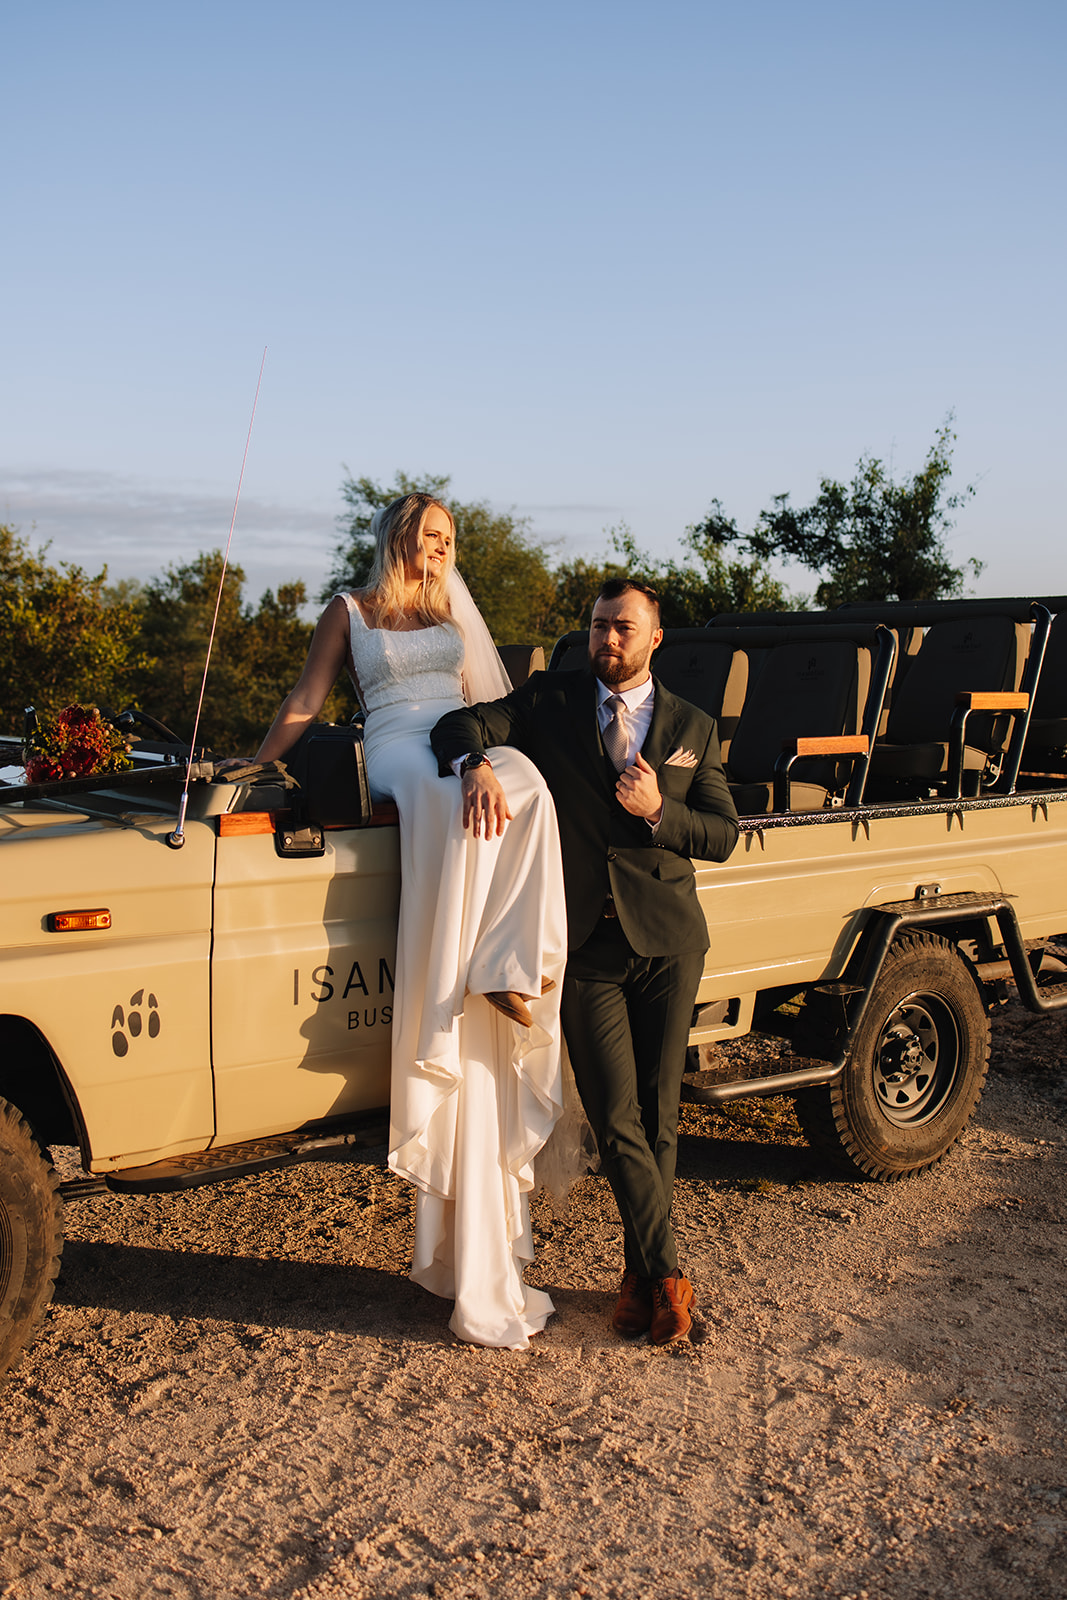 A bride in a white gown and veil on a safari elopement in south africa.They are outdoors with trees and sky in the background.